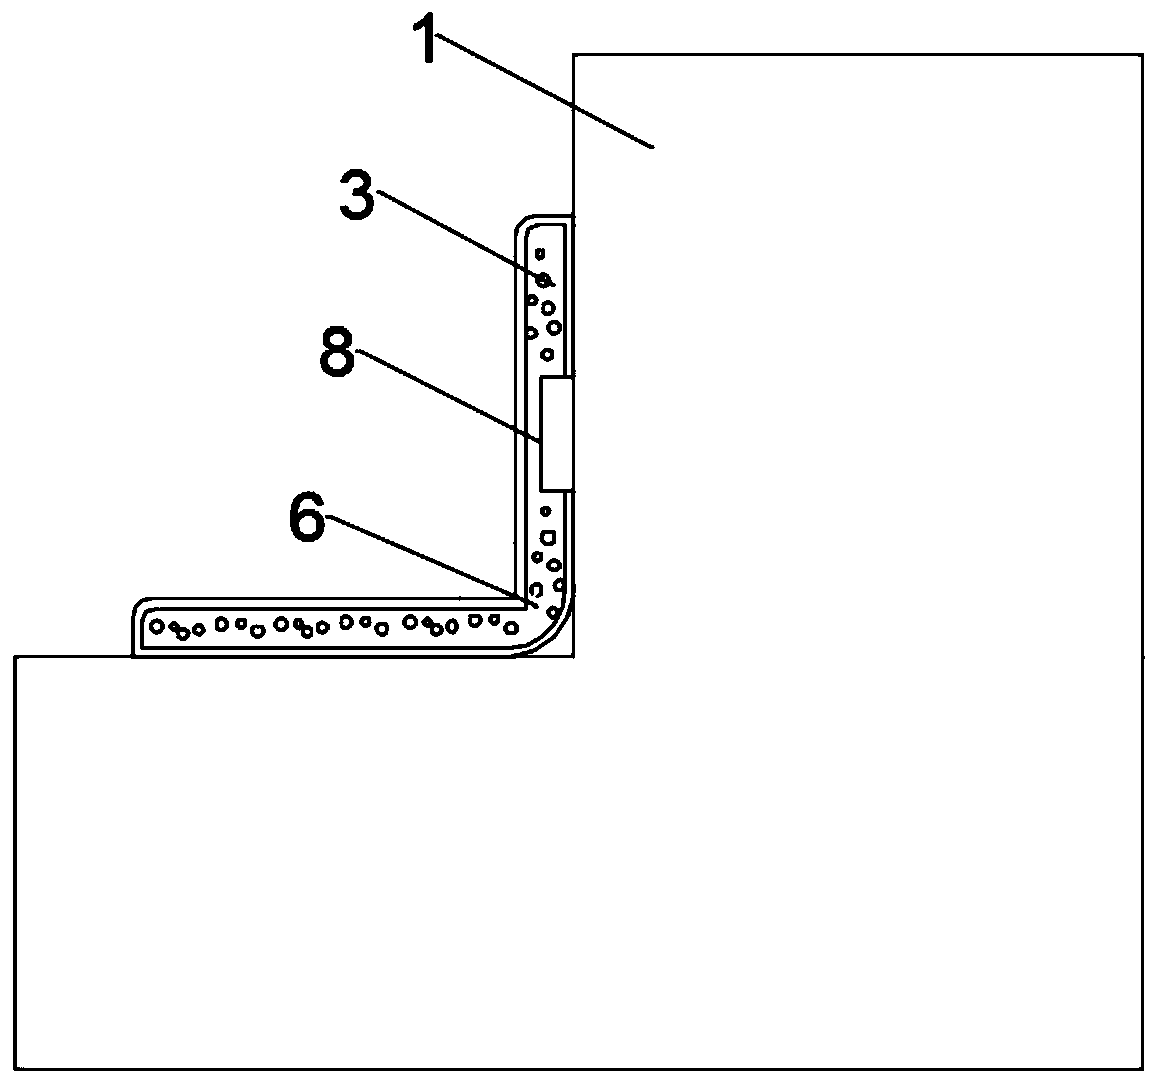 Light concrete internal and external corner structure in prefabricated building and installation method